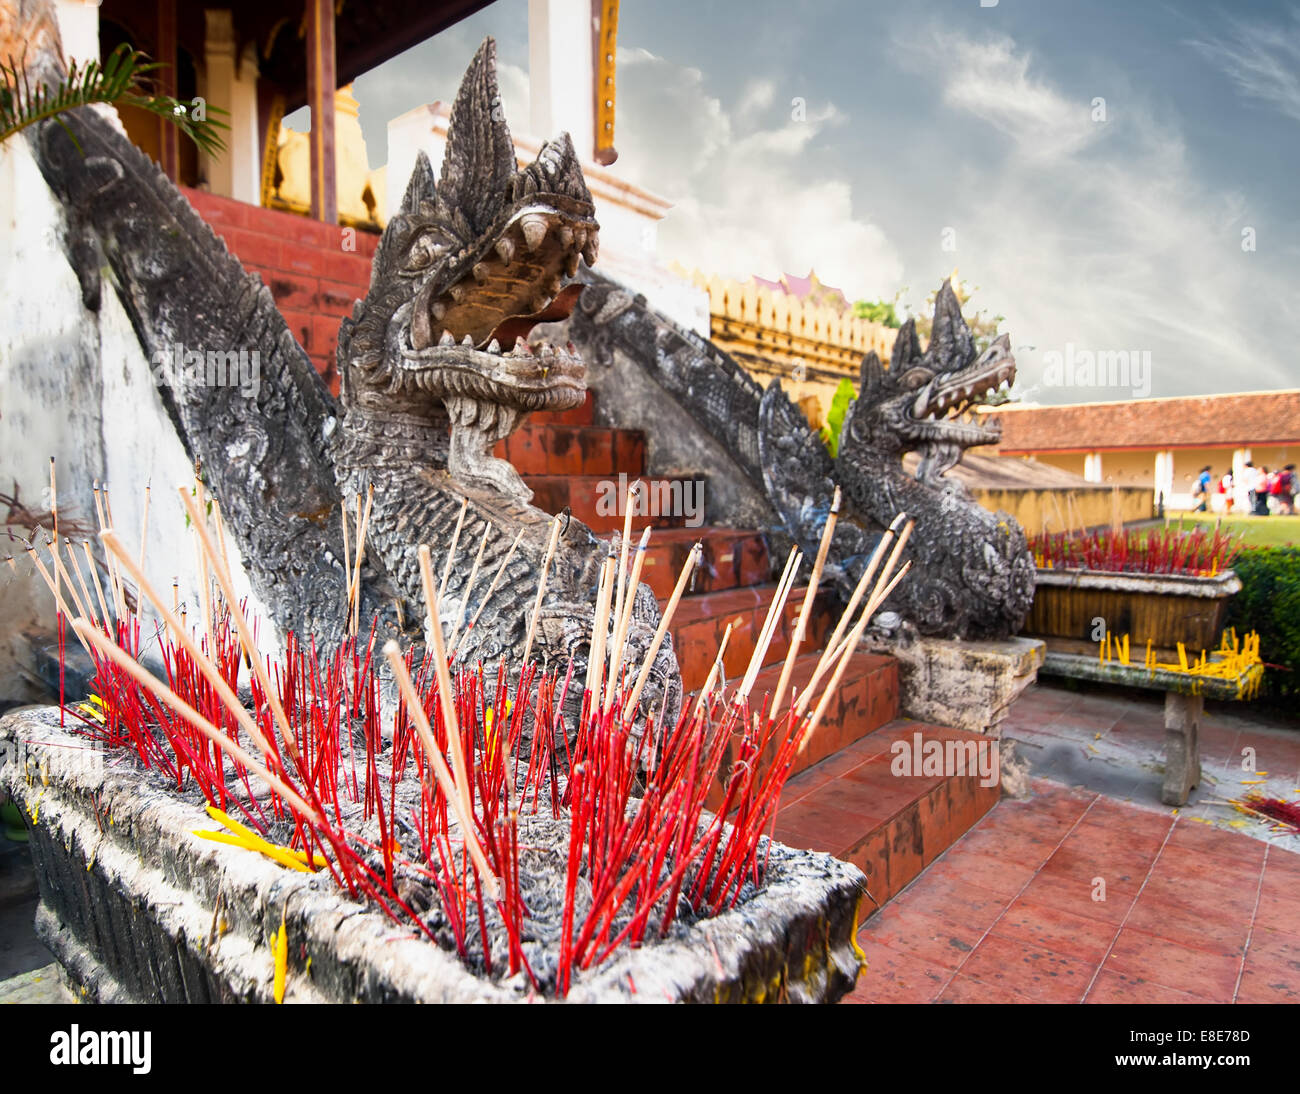 Ritual smoke of aroma sticks at Golden buddhist pagoda Phra That Luang Temple. Vientiane, Laos travel landscape and destinations Stock Photo